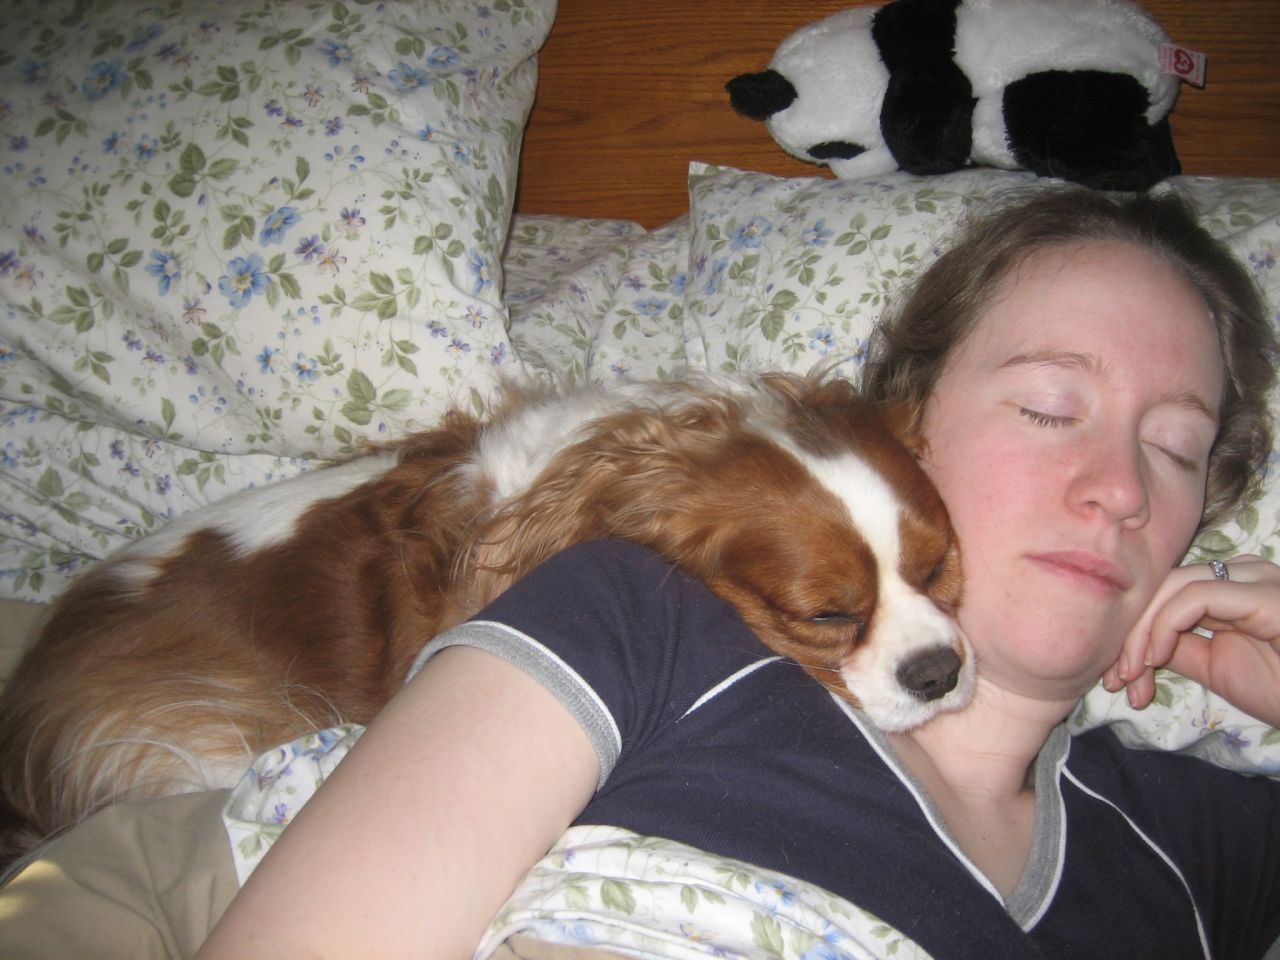 Kelly Wahle lives with chronic migraine disease, Meniere's disease, fibromyalgia, irritable bowel syndrome and anxiety. Her dog, Mr. Knightley, passed away recently. He "always took care of me," she said.